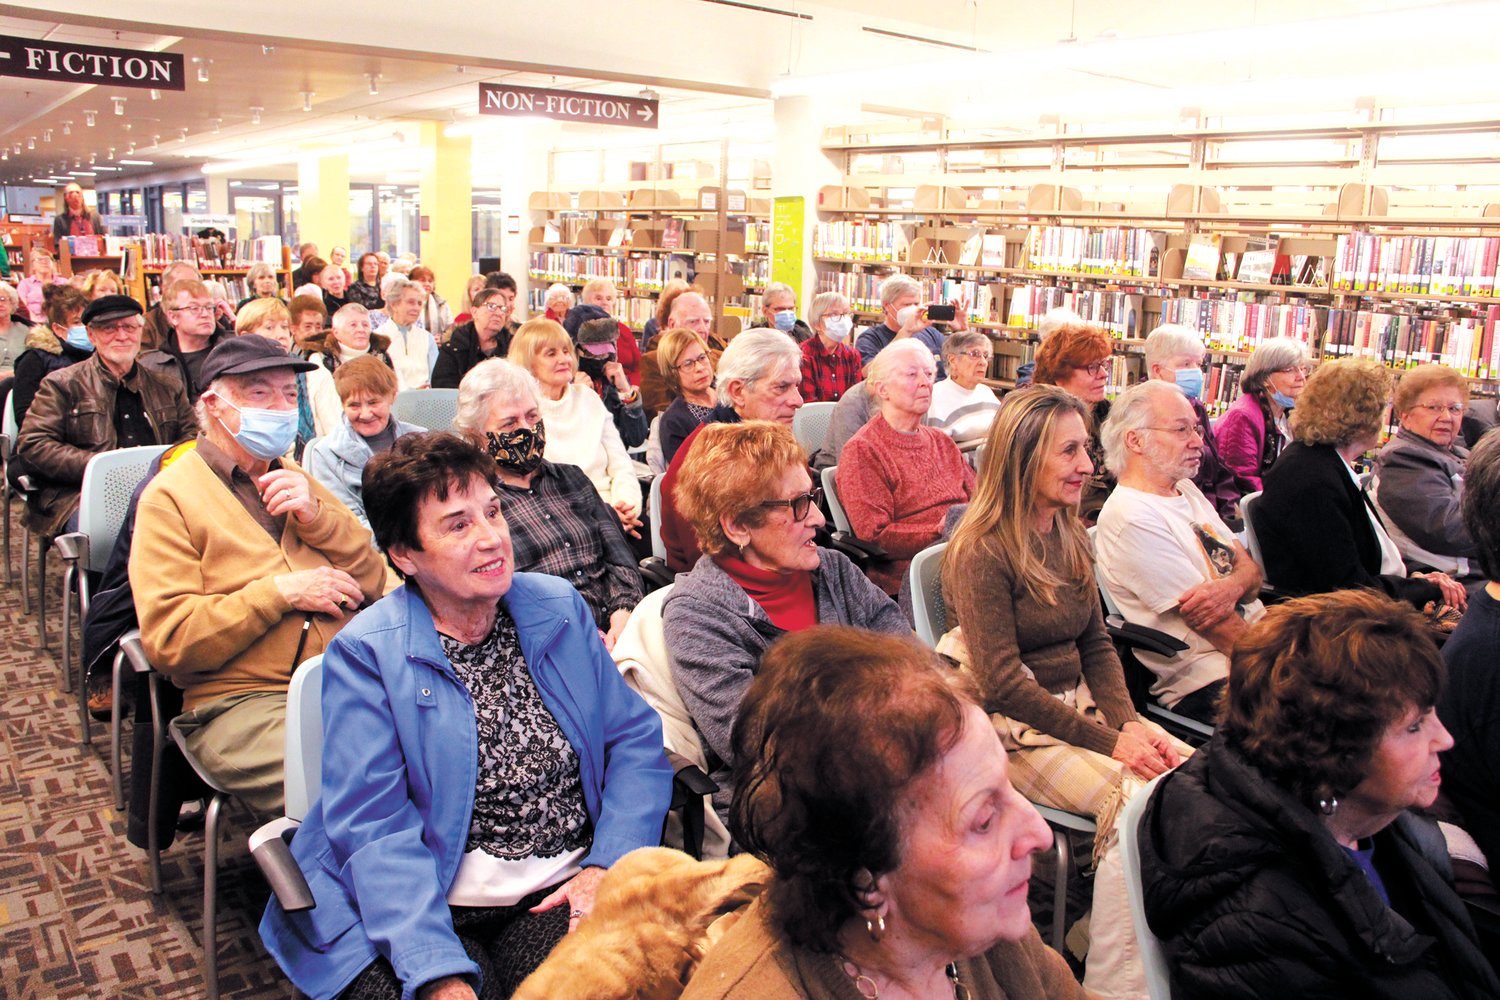 PACKED BETWEEN THE AISLES: The library’s community room couldn’t accommodate the turnout, so concert goers booked on finding a seat among the shelves.